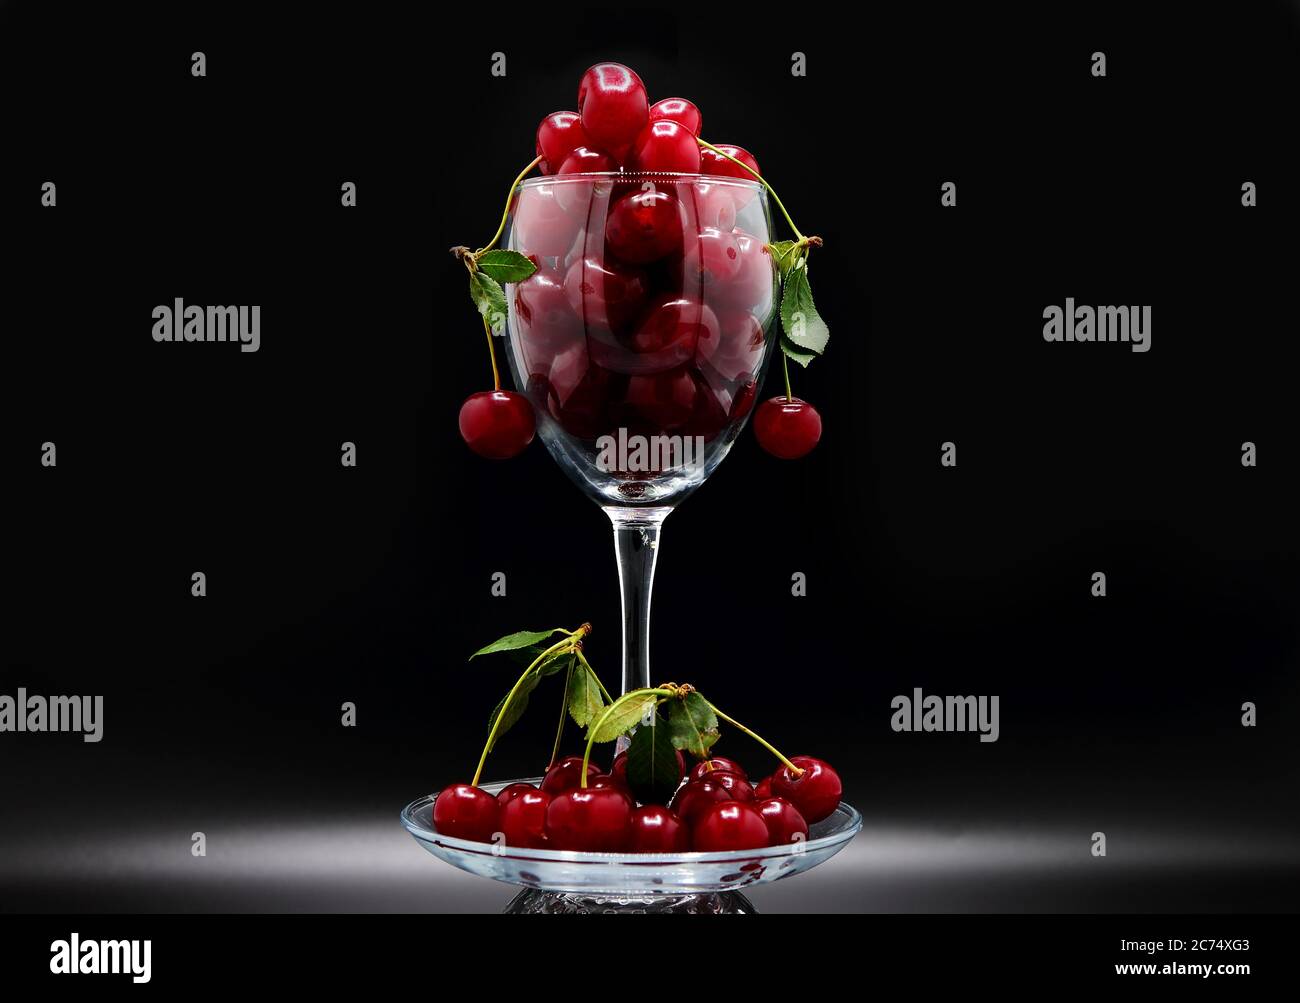 Full wine glass of ripe cherries on a black background. Natural product. Natural color. Close-up. Stock Photo